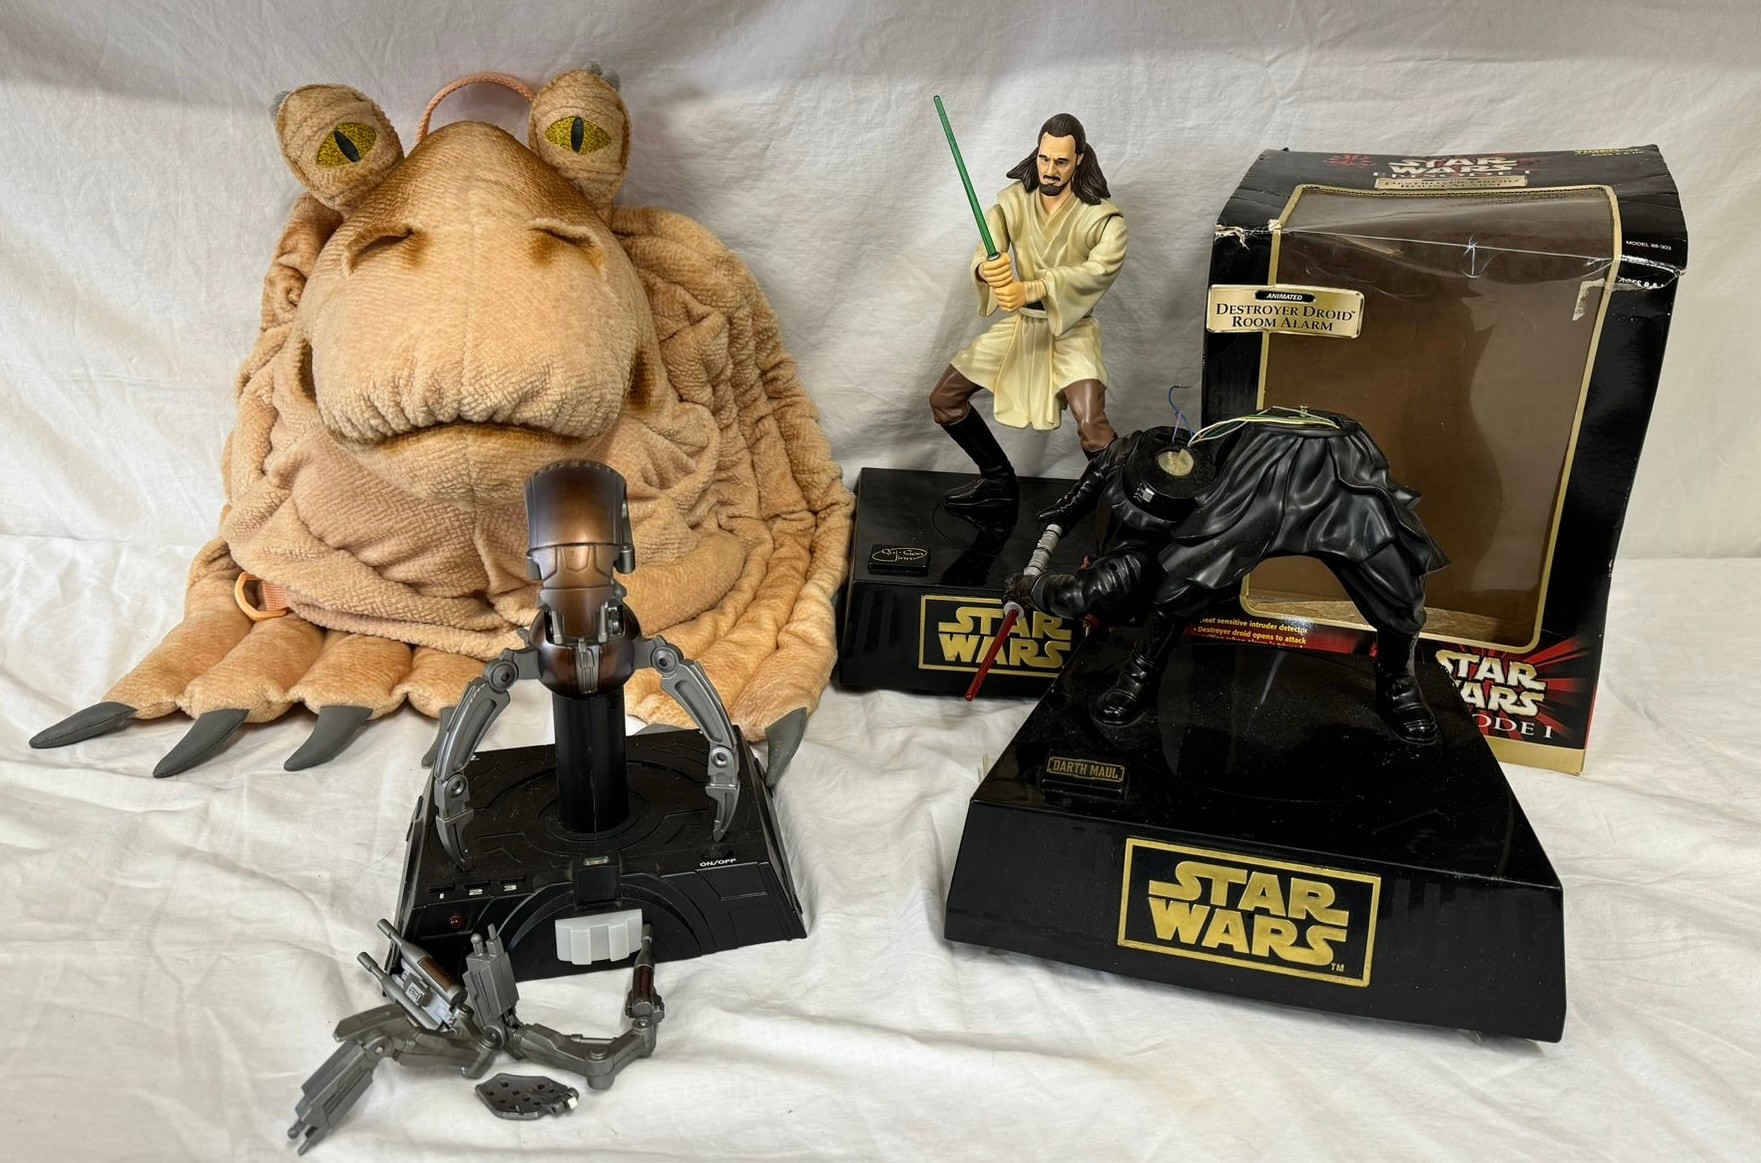 Three Star Wars room alarms to include Qui -Gon Jinn, Darth Maul and Destroyer Droid along with a